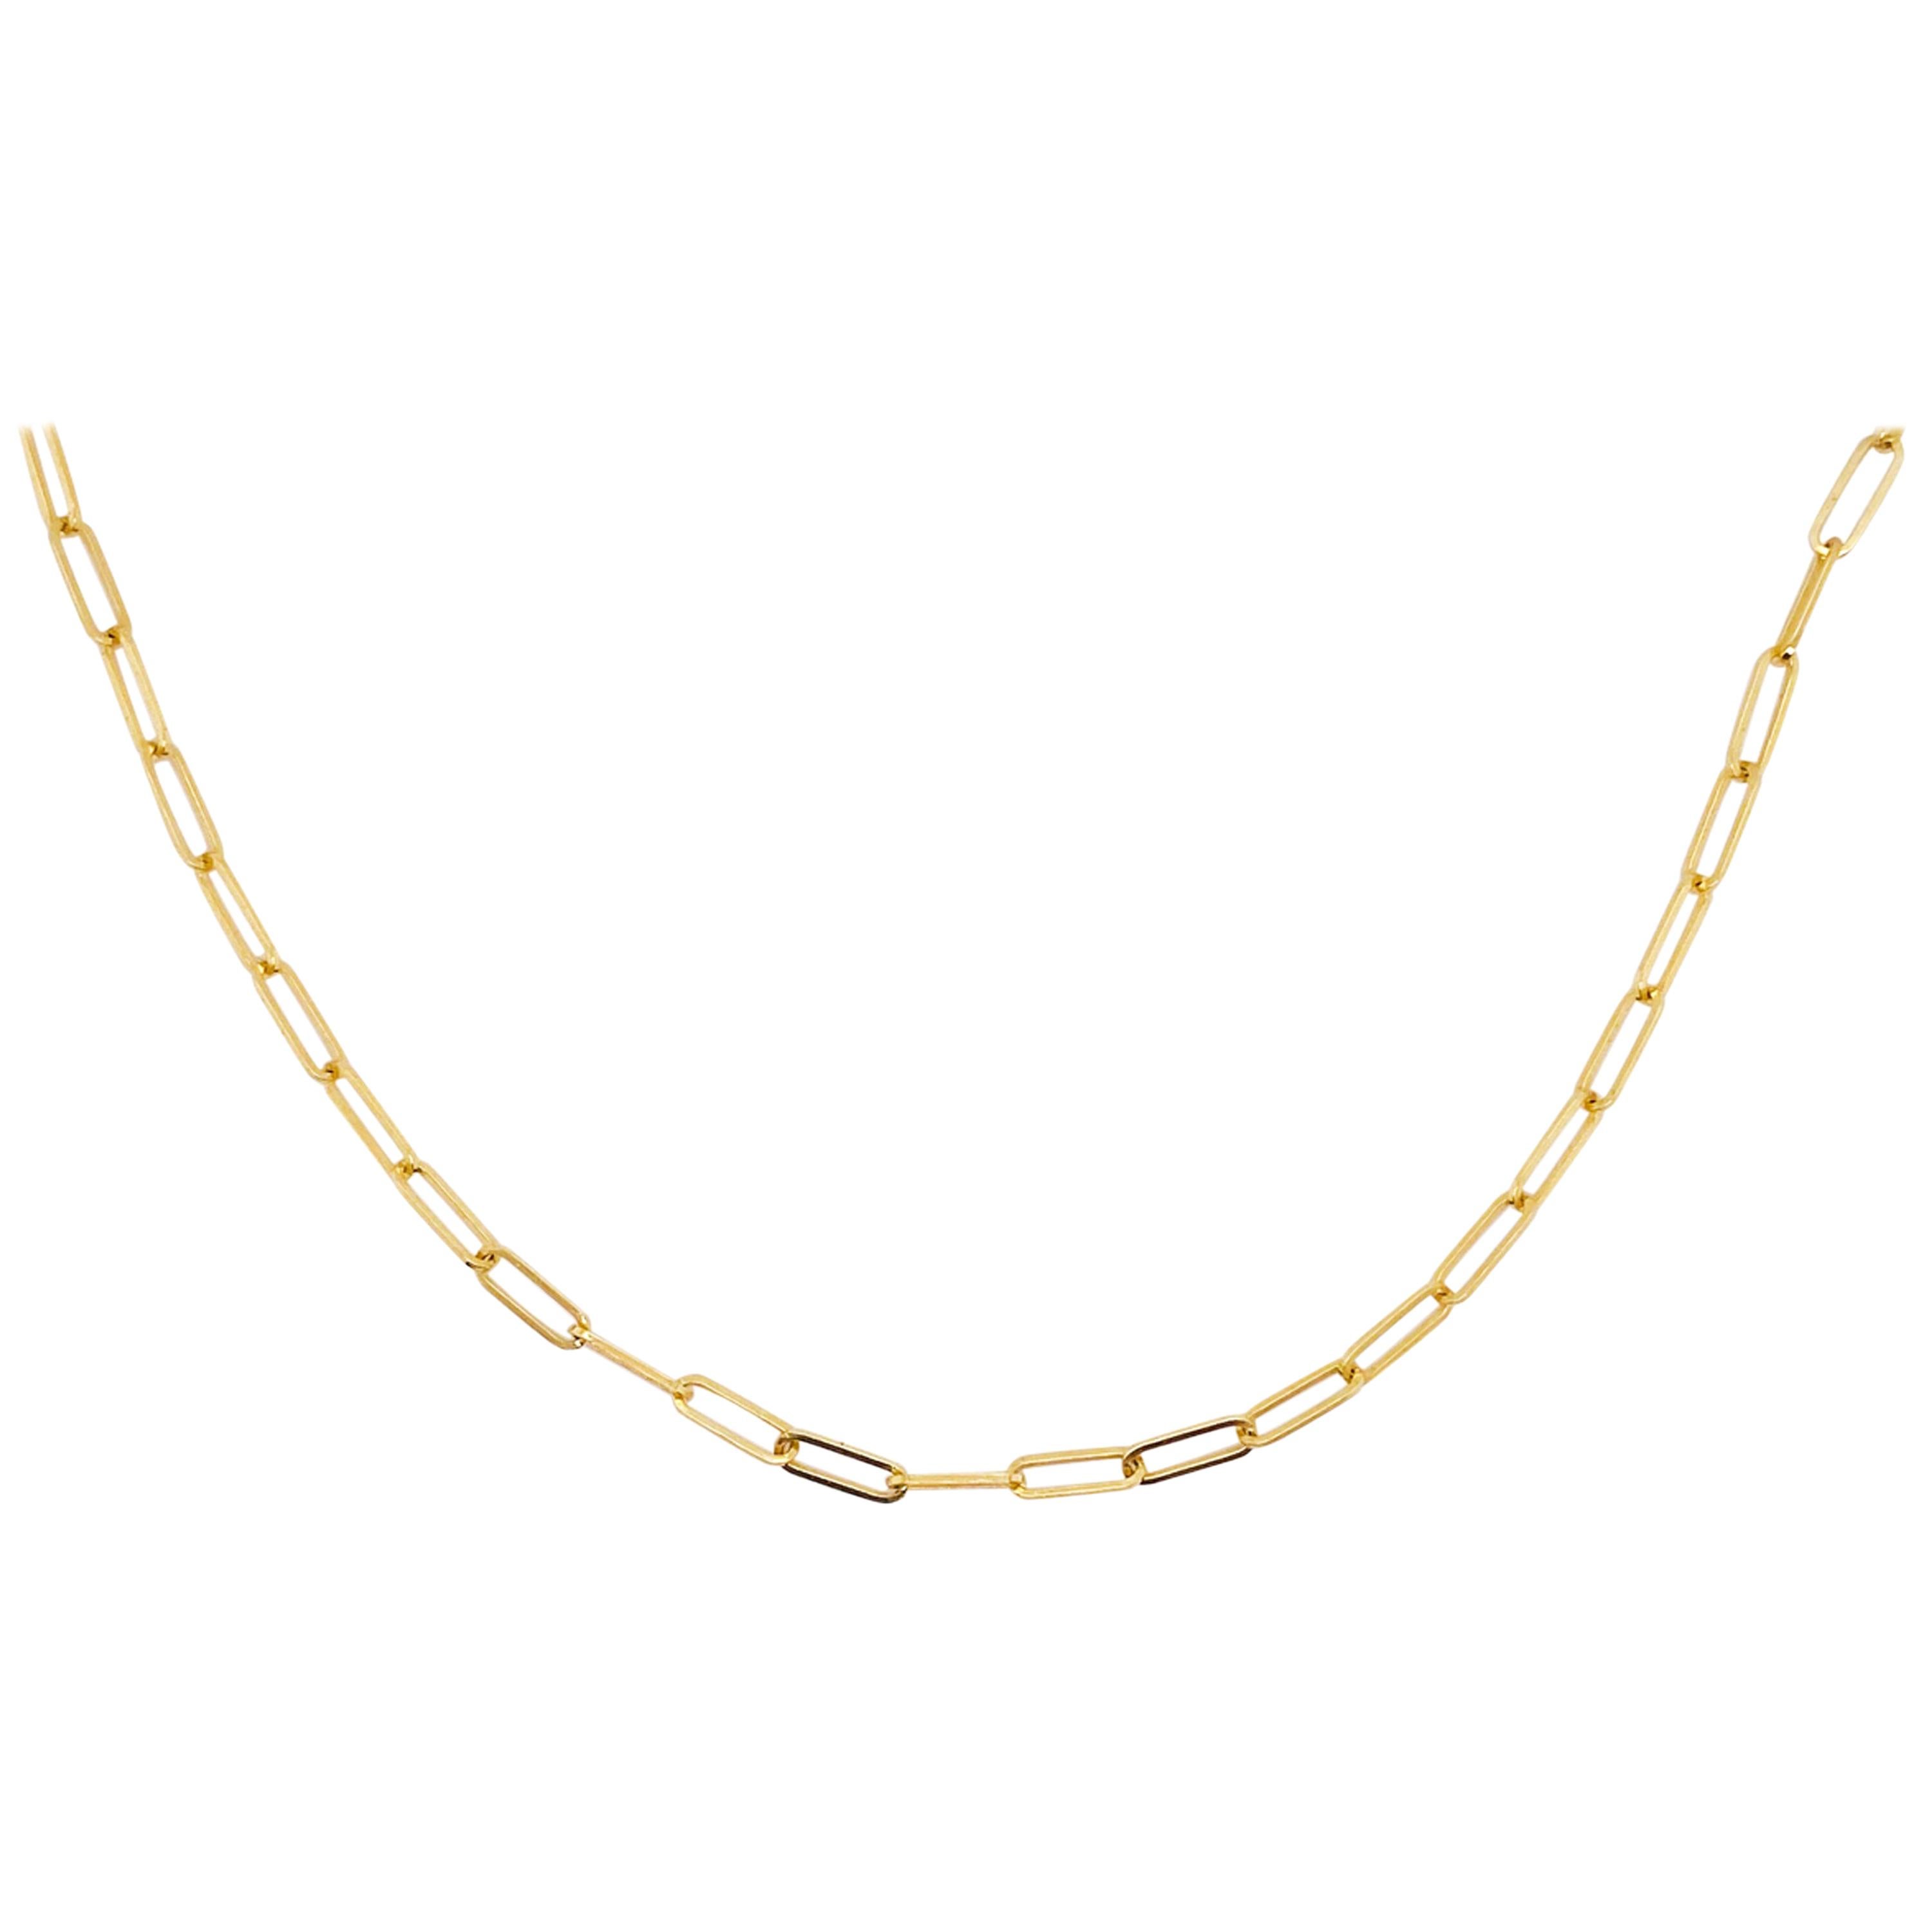 14K Yellow Gold 2.5 mm Paperclip Chain Link Layer Thin Necklace 18 to 26 inches 